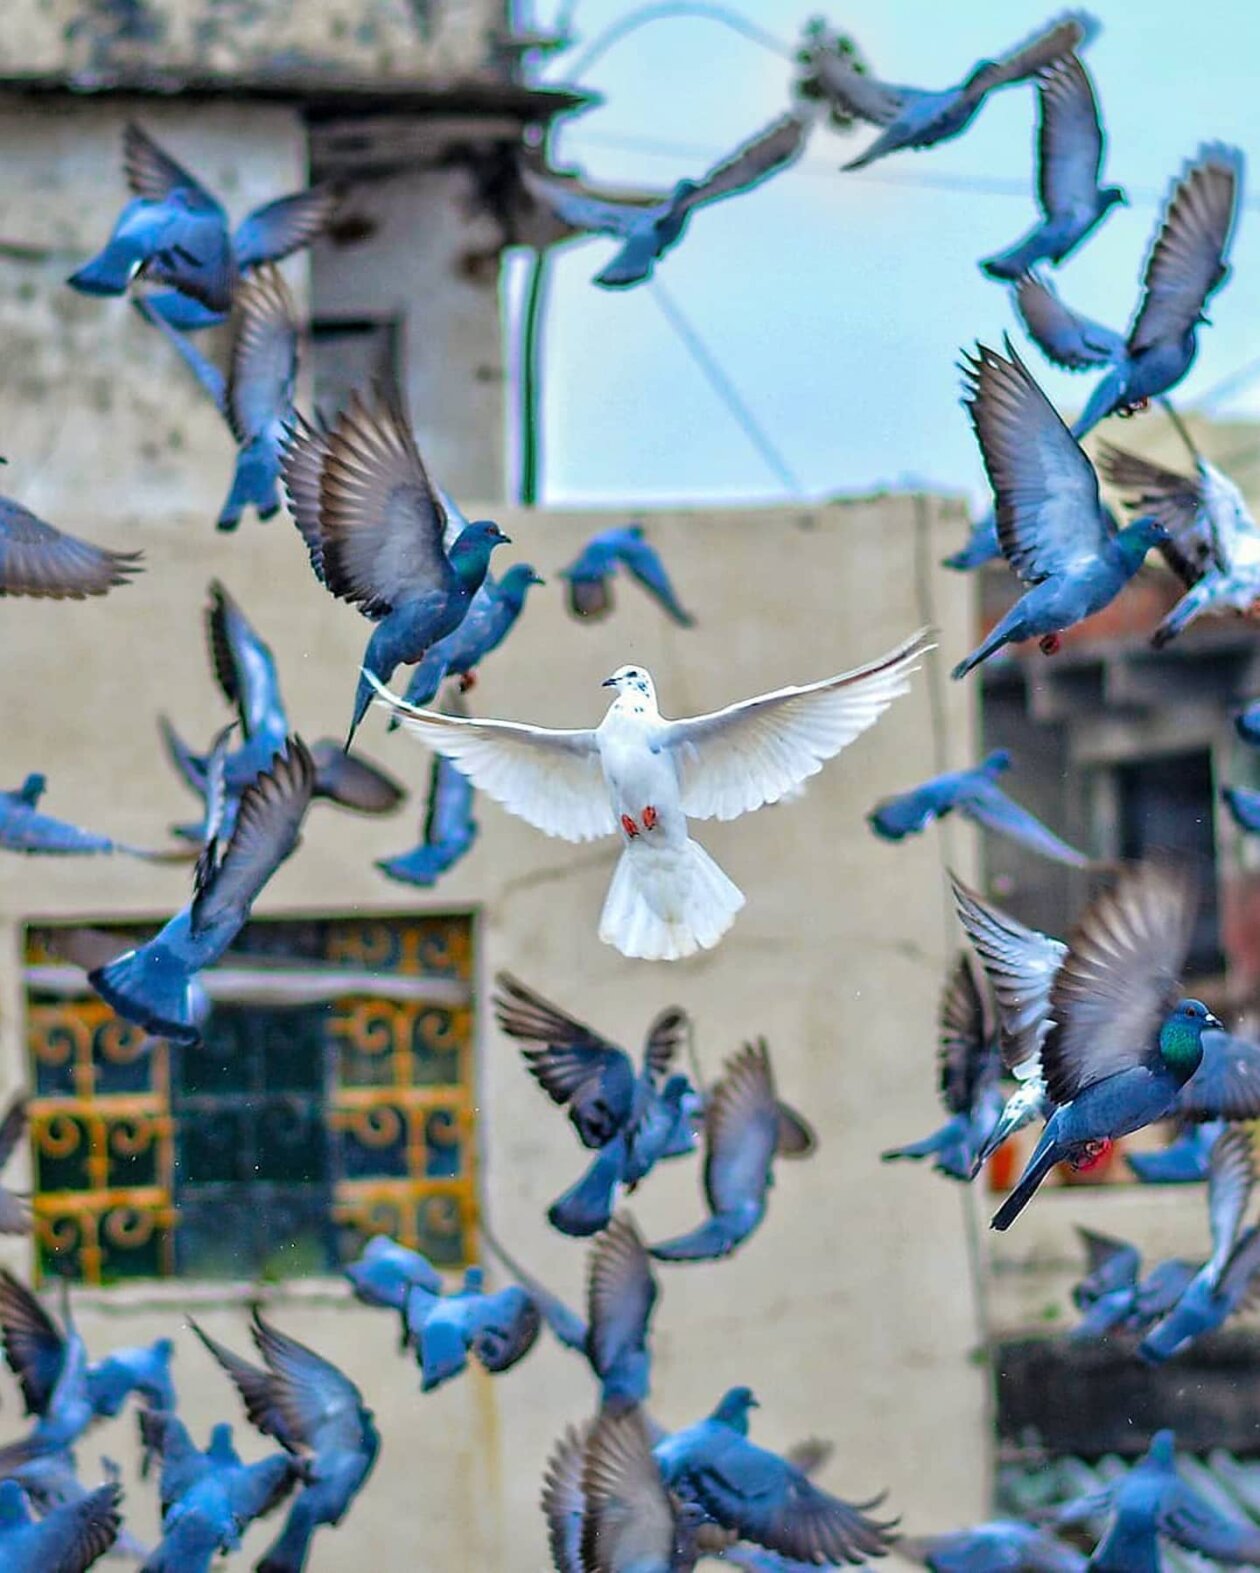 Amazing Photo Of A Pigeon Flock By Rajiv Kapoor